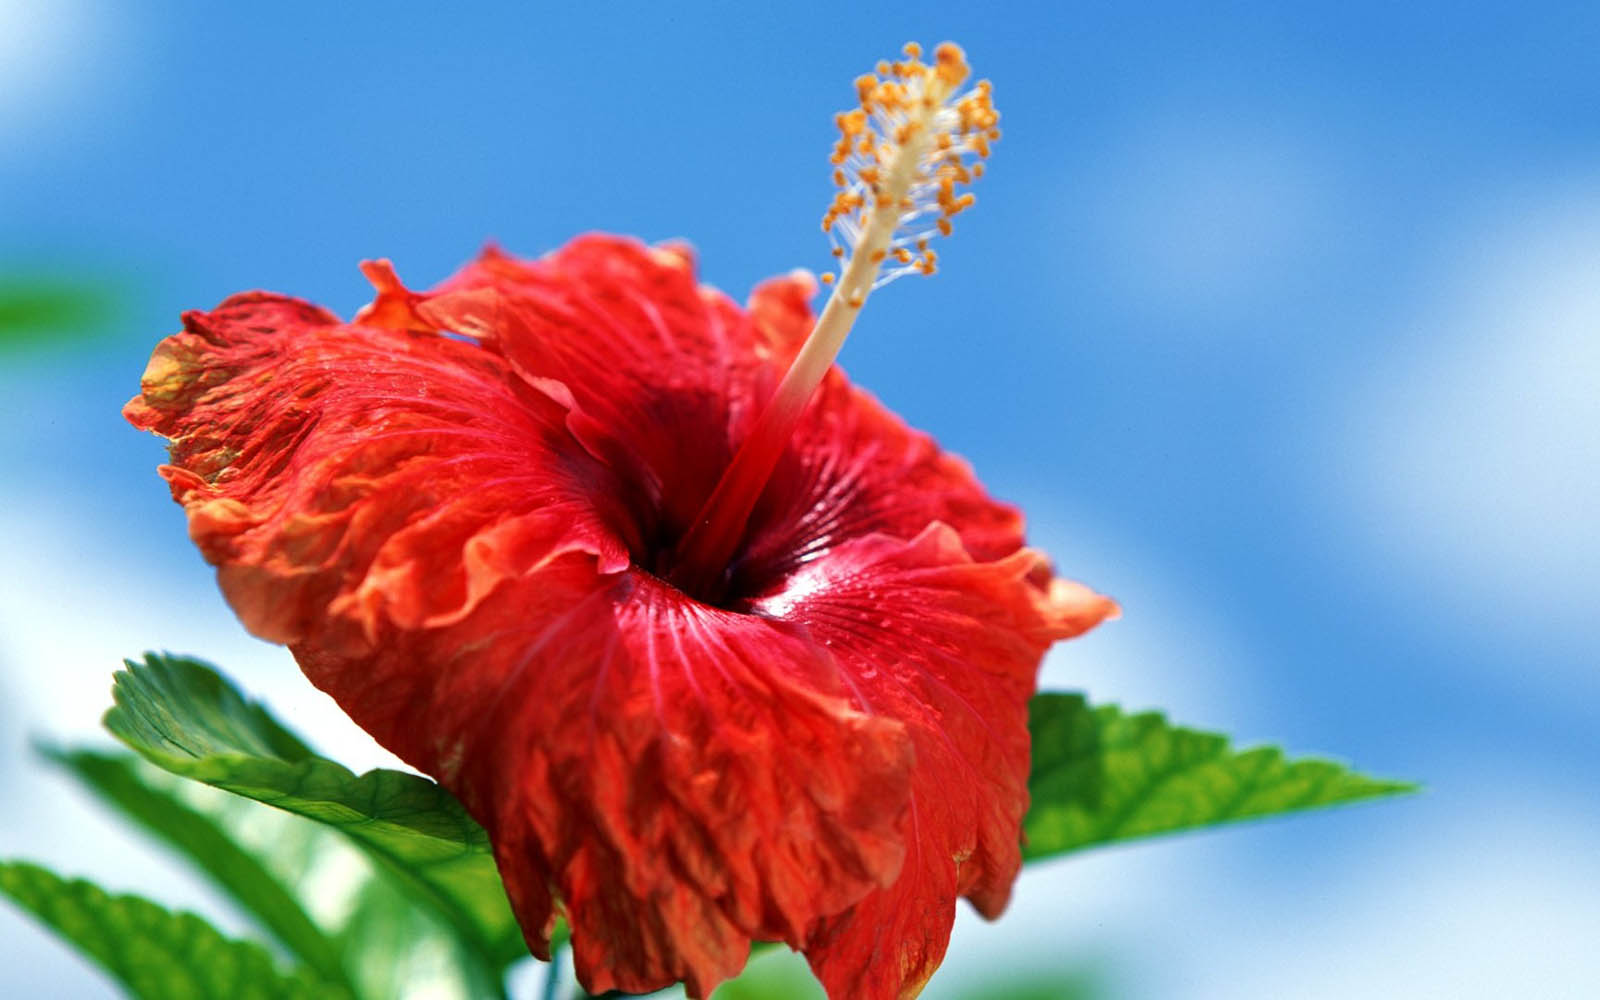 Tag Hibiscus Flowers Wallpaper Background Photos Image And